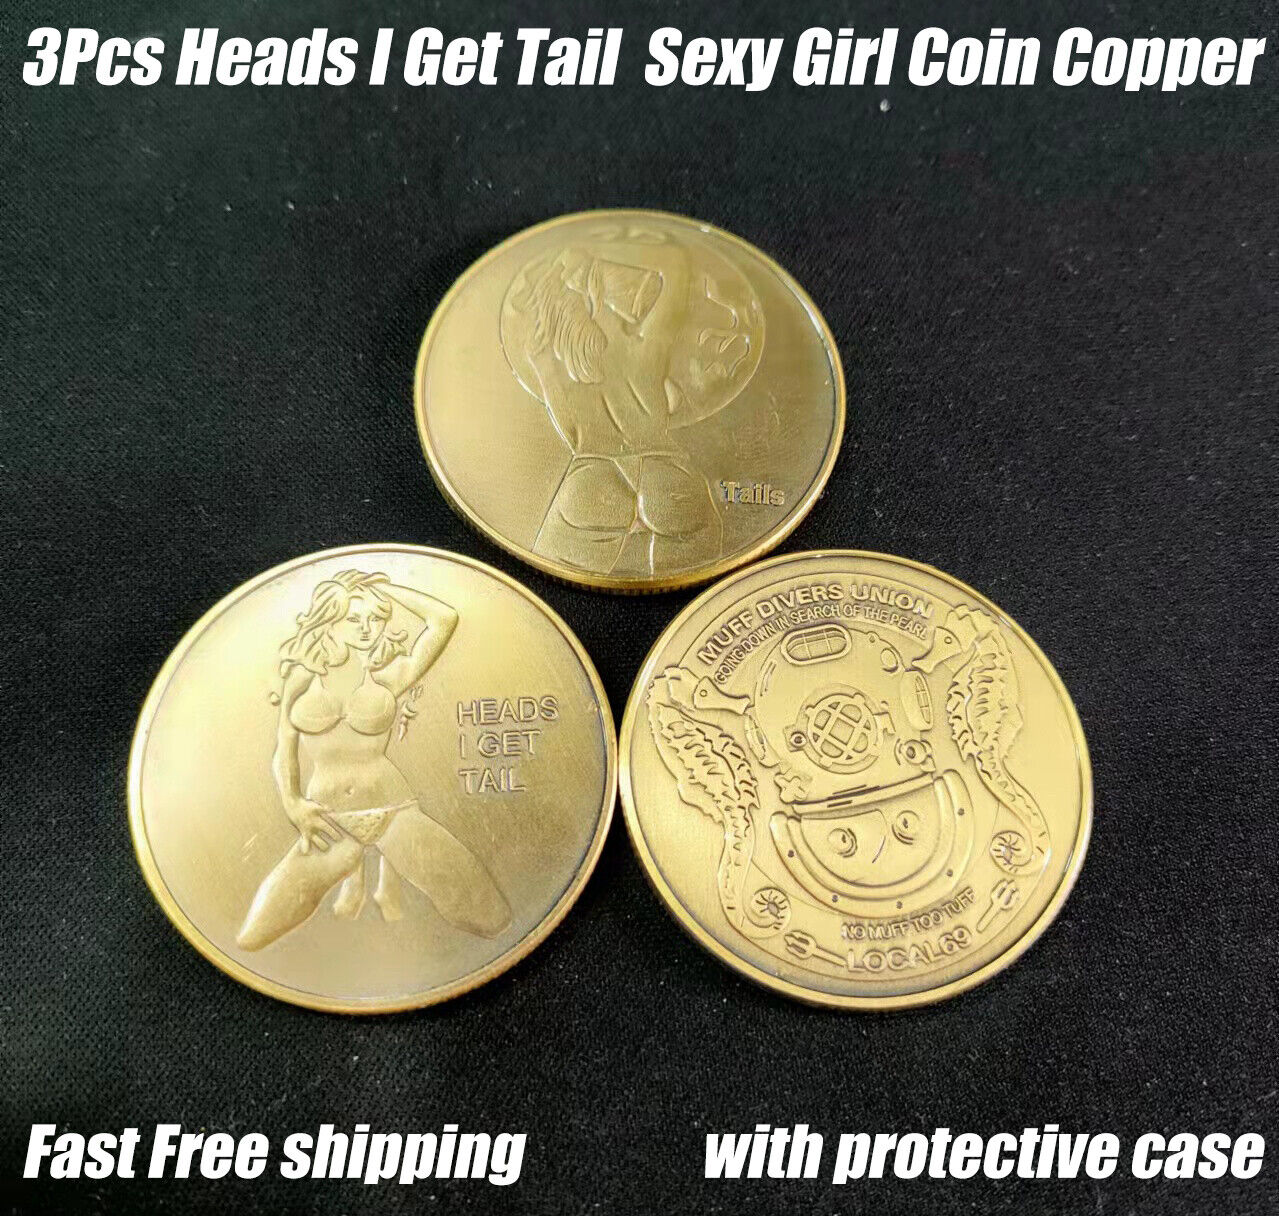 3Pcs Heads I Get Tail/wetter is better Sexy Girl Flipping Coins Copper With Case